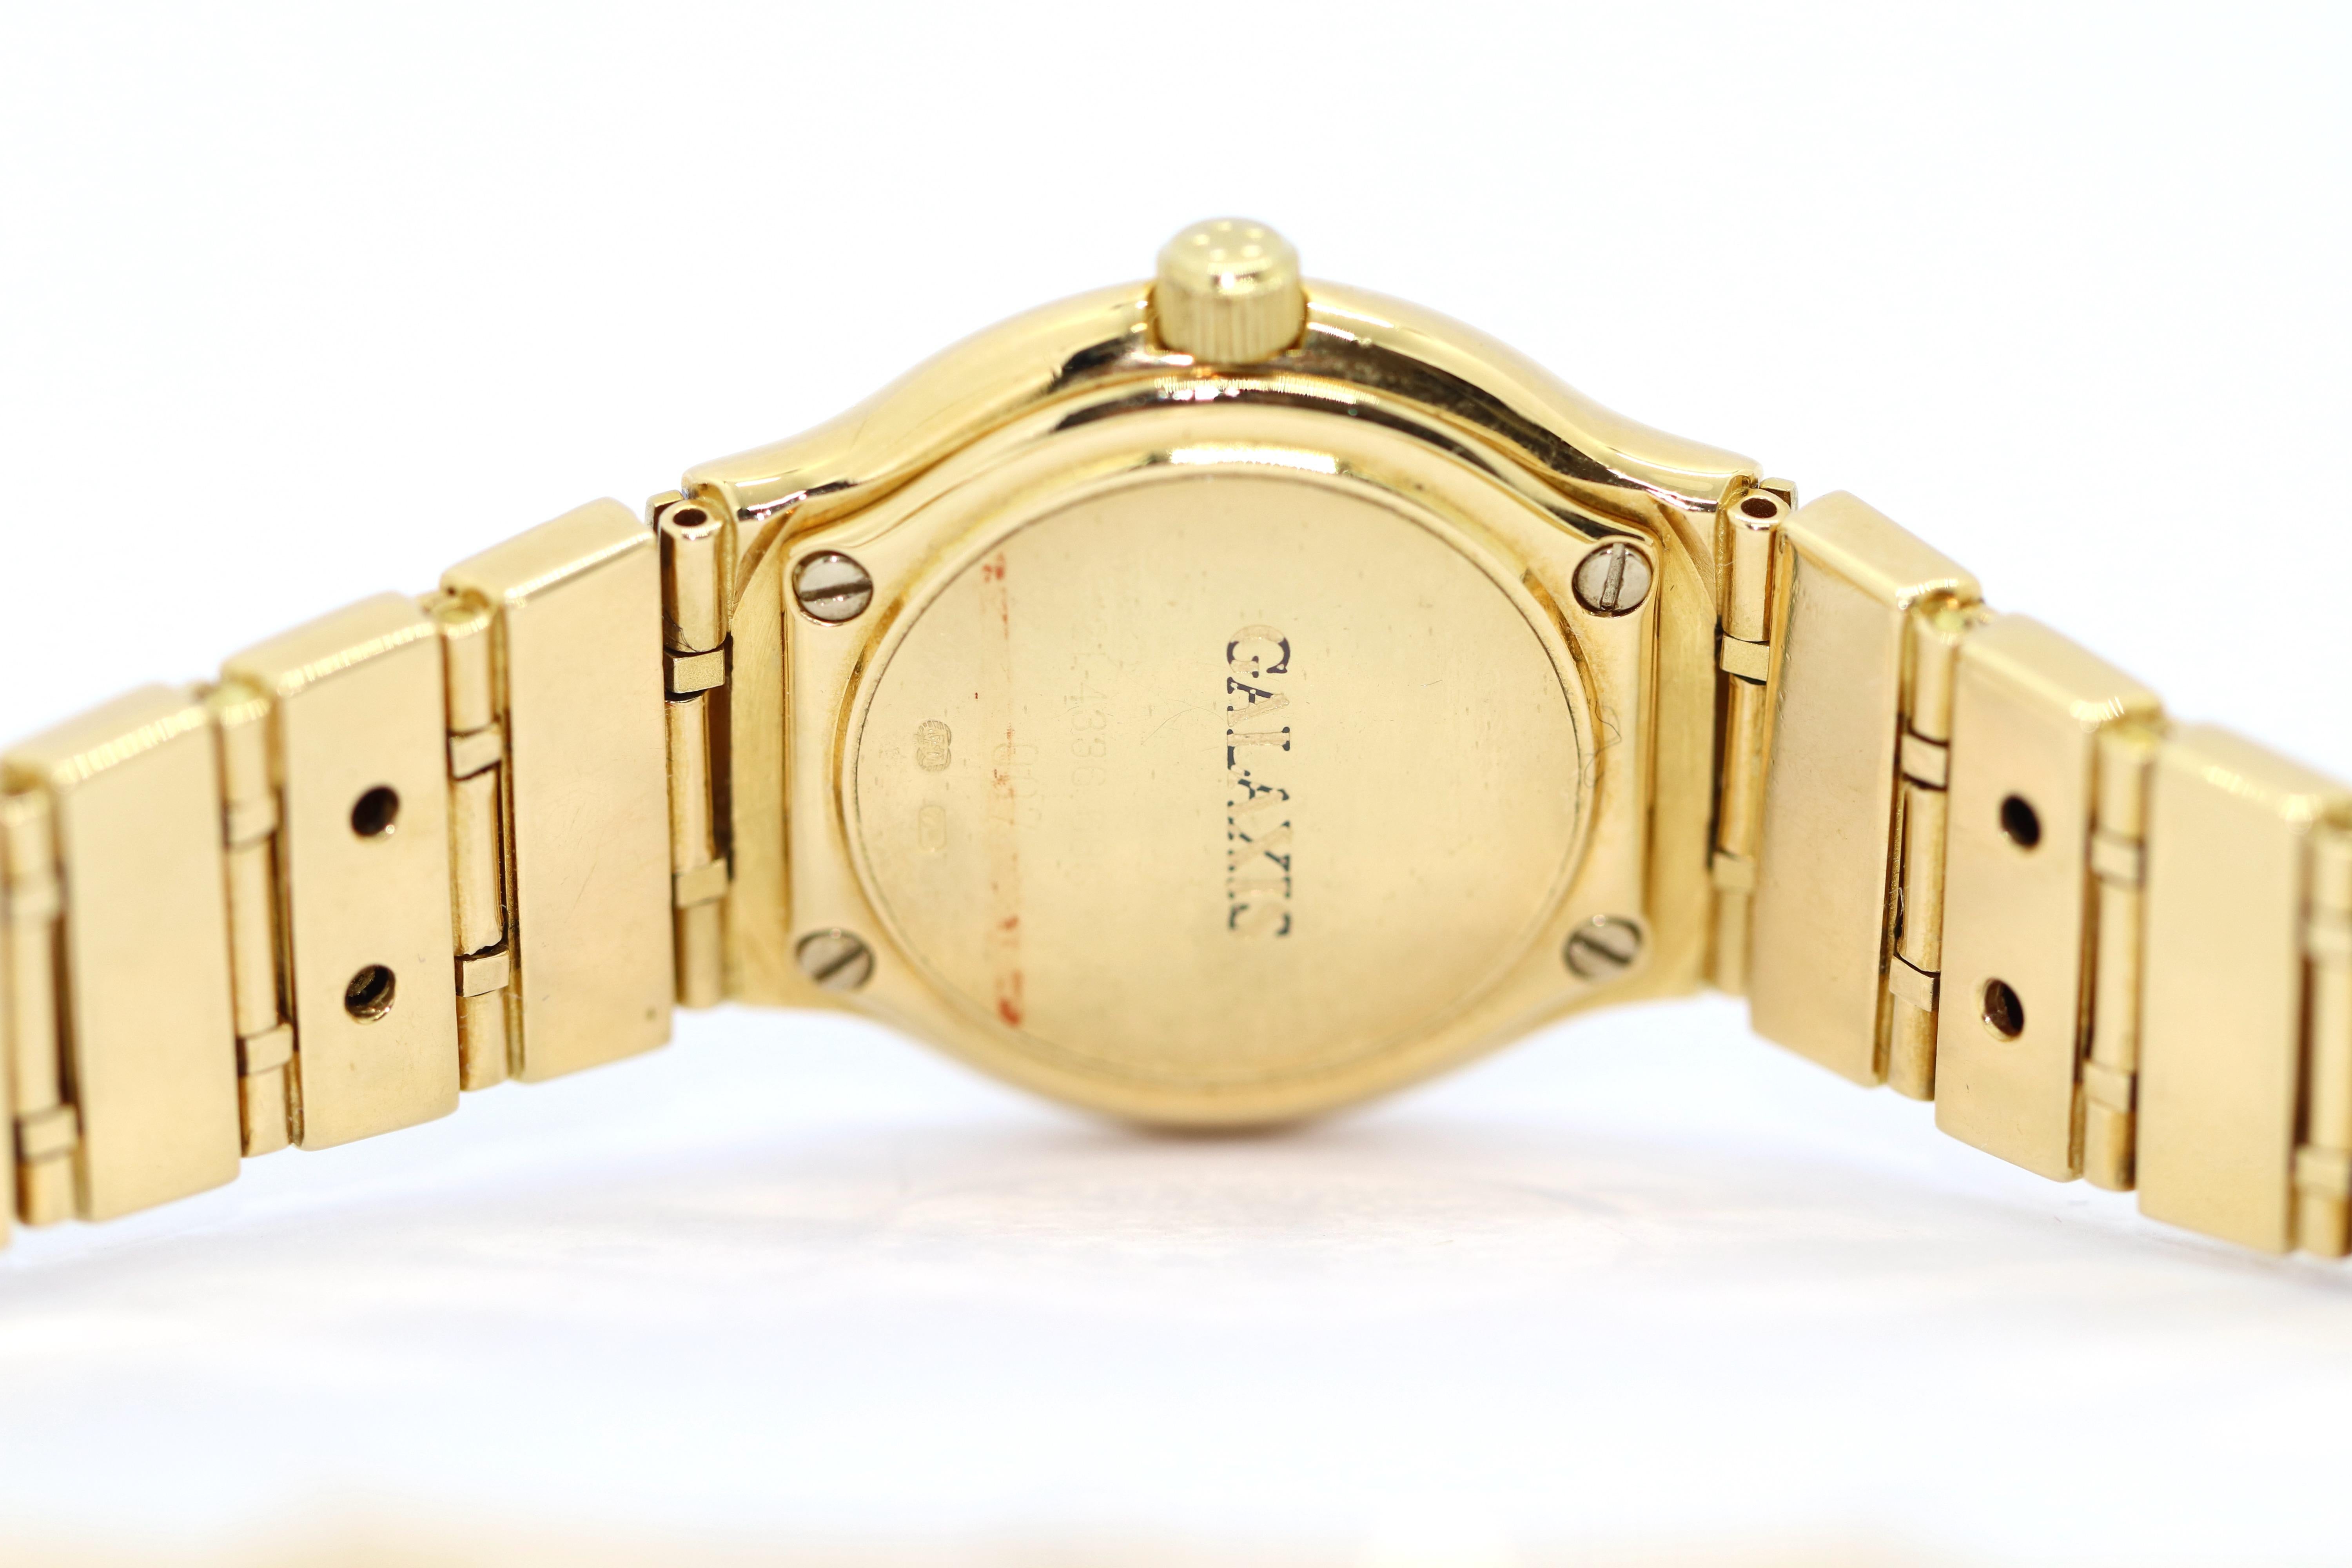 Limited 18 Karat Gold Ladies Wrist Watch by Eterna, Model Galaxis, Number 007 For Sale 2